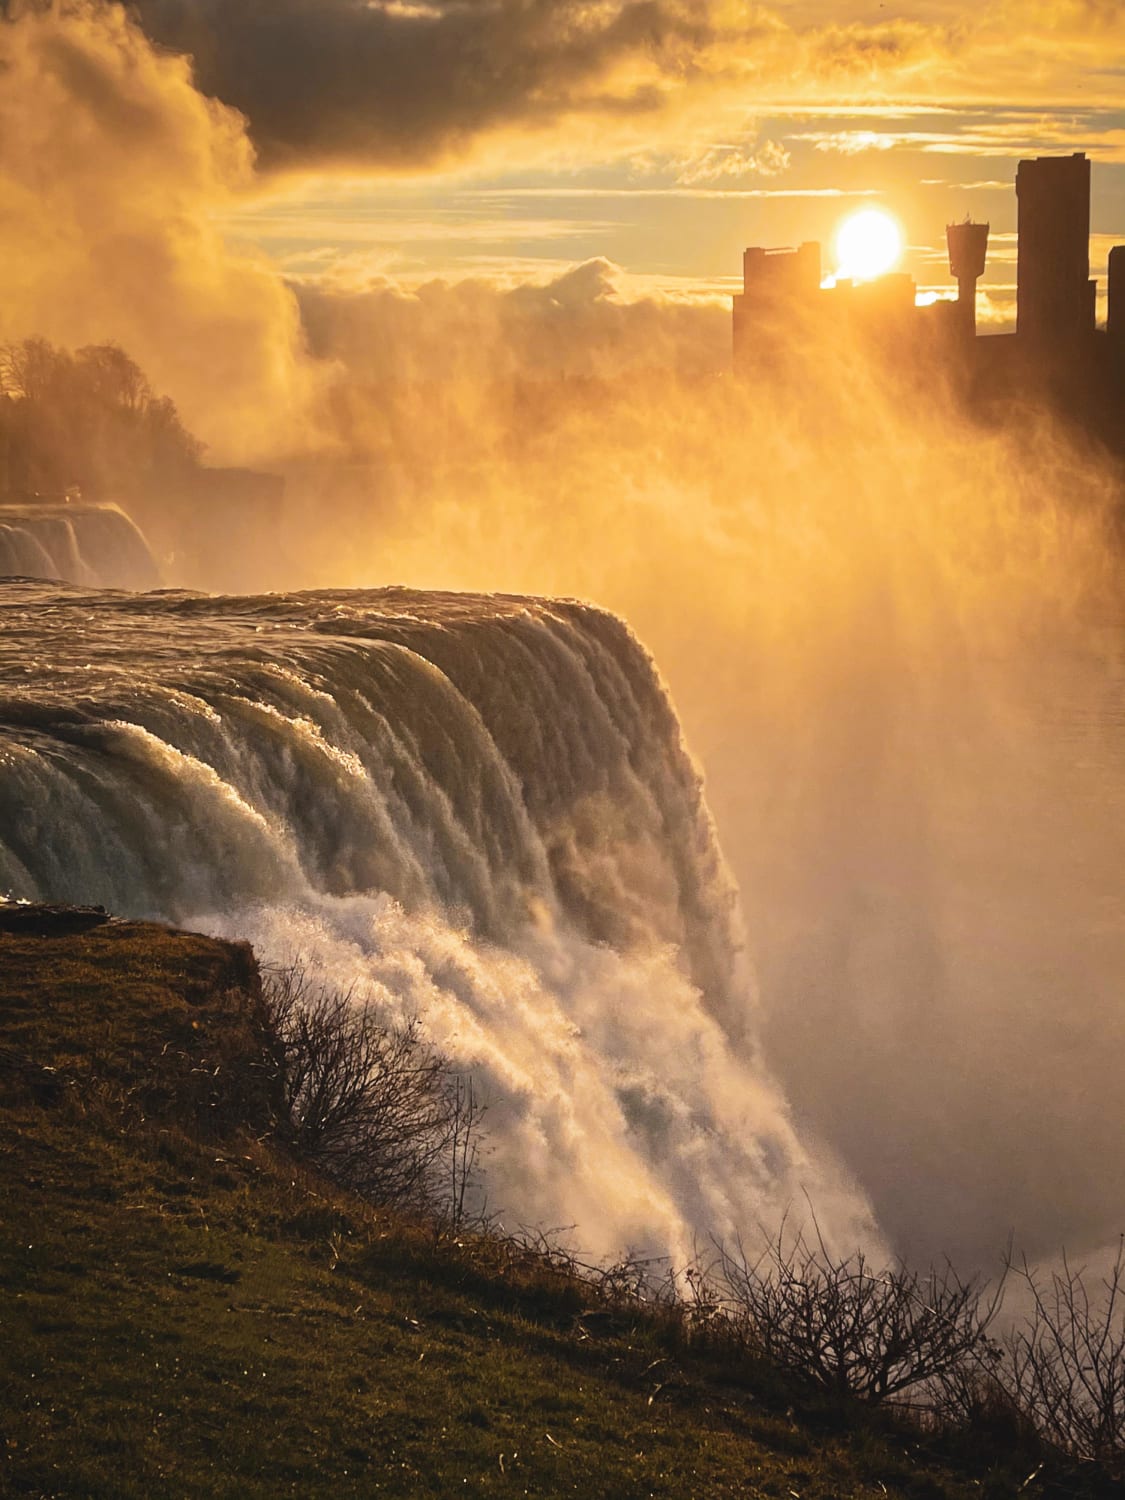 ITAP of Niagara Falls (USA side) during Golden Hour